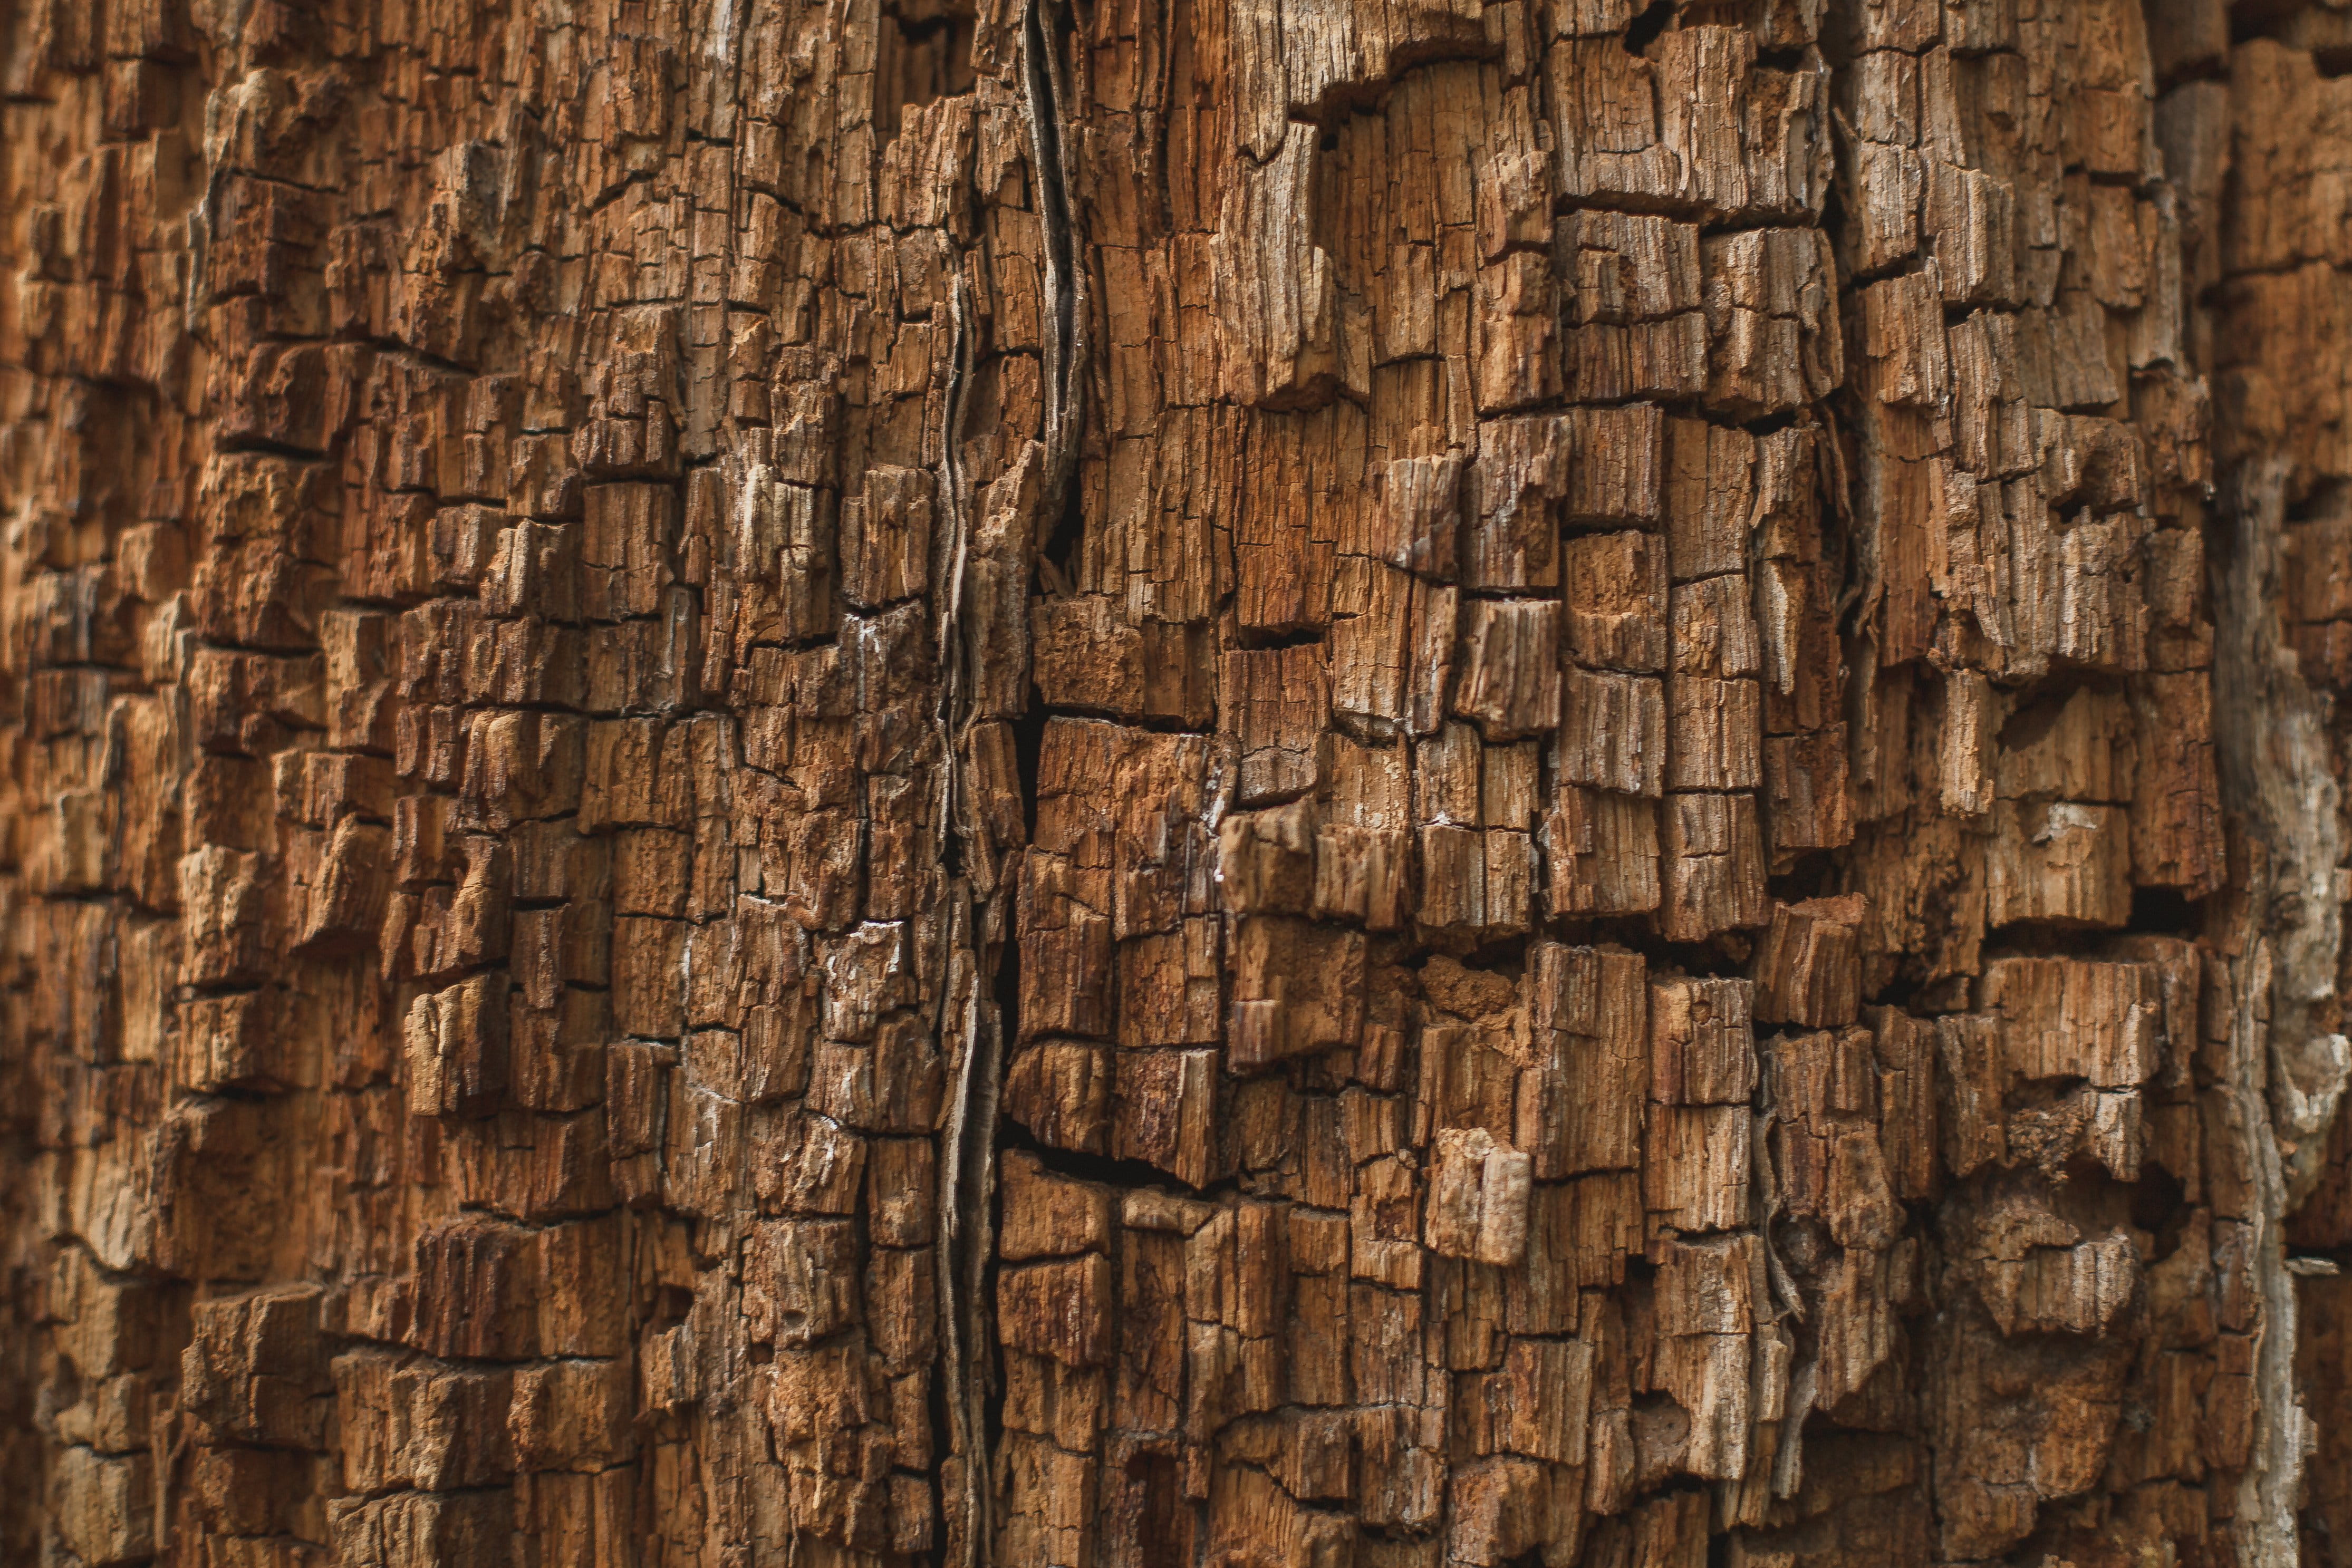 Rotting Wood Texture Photo, Textures, Outdoor, wood - material